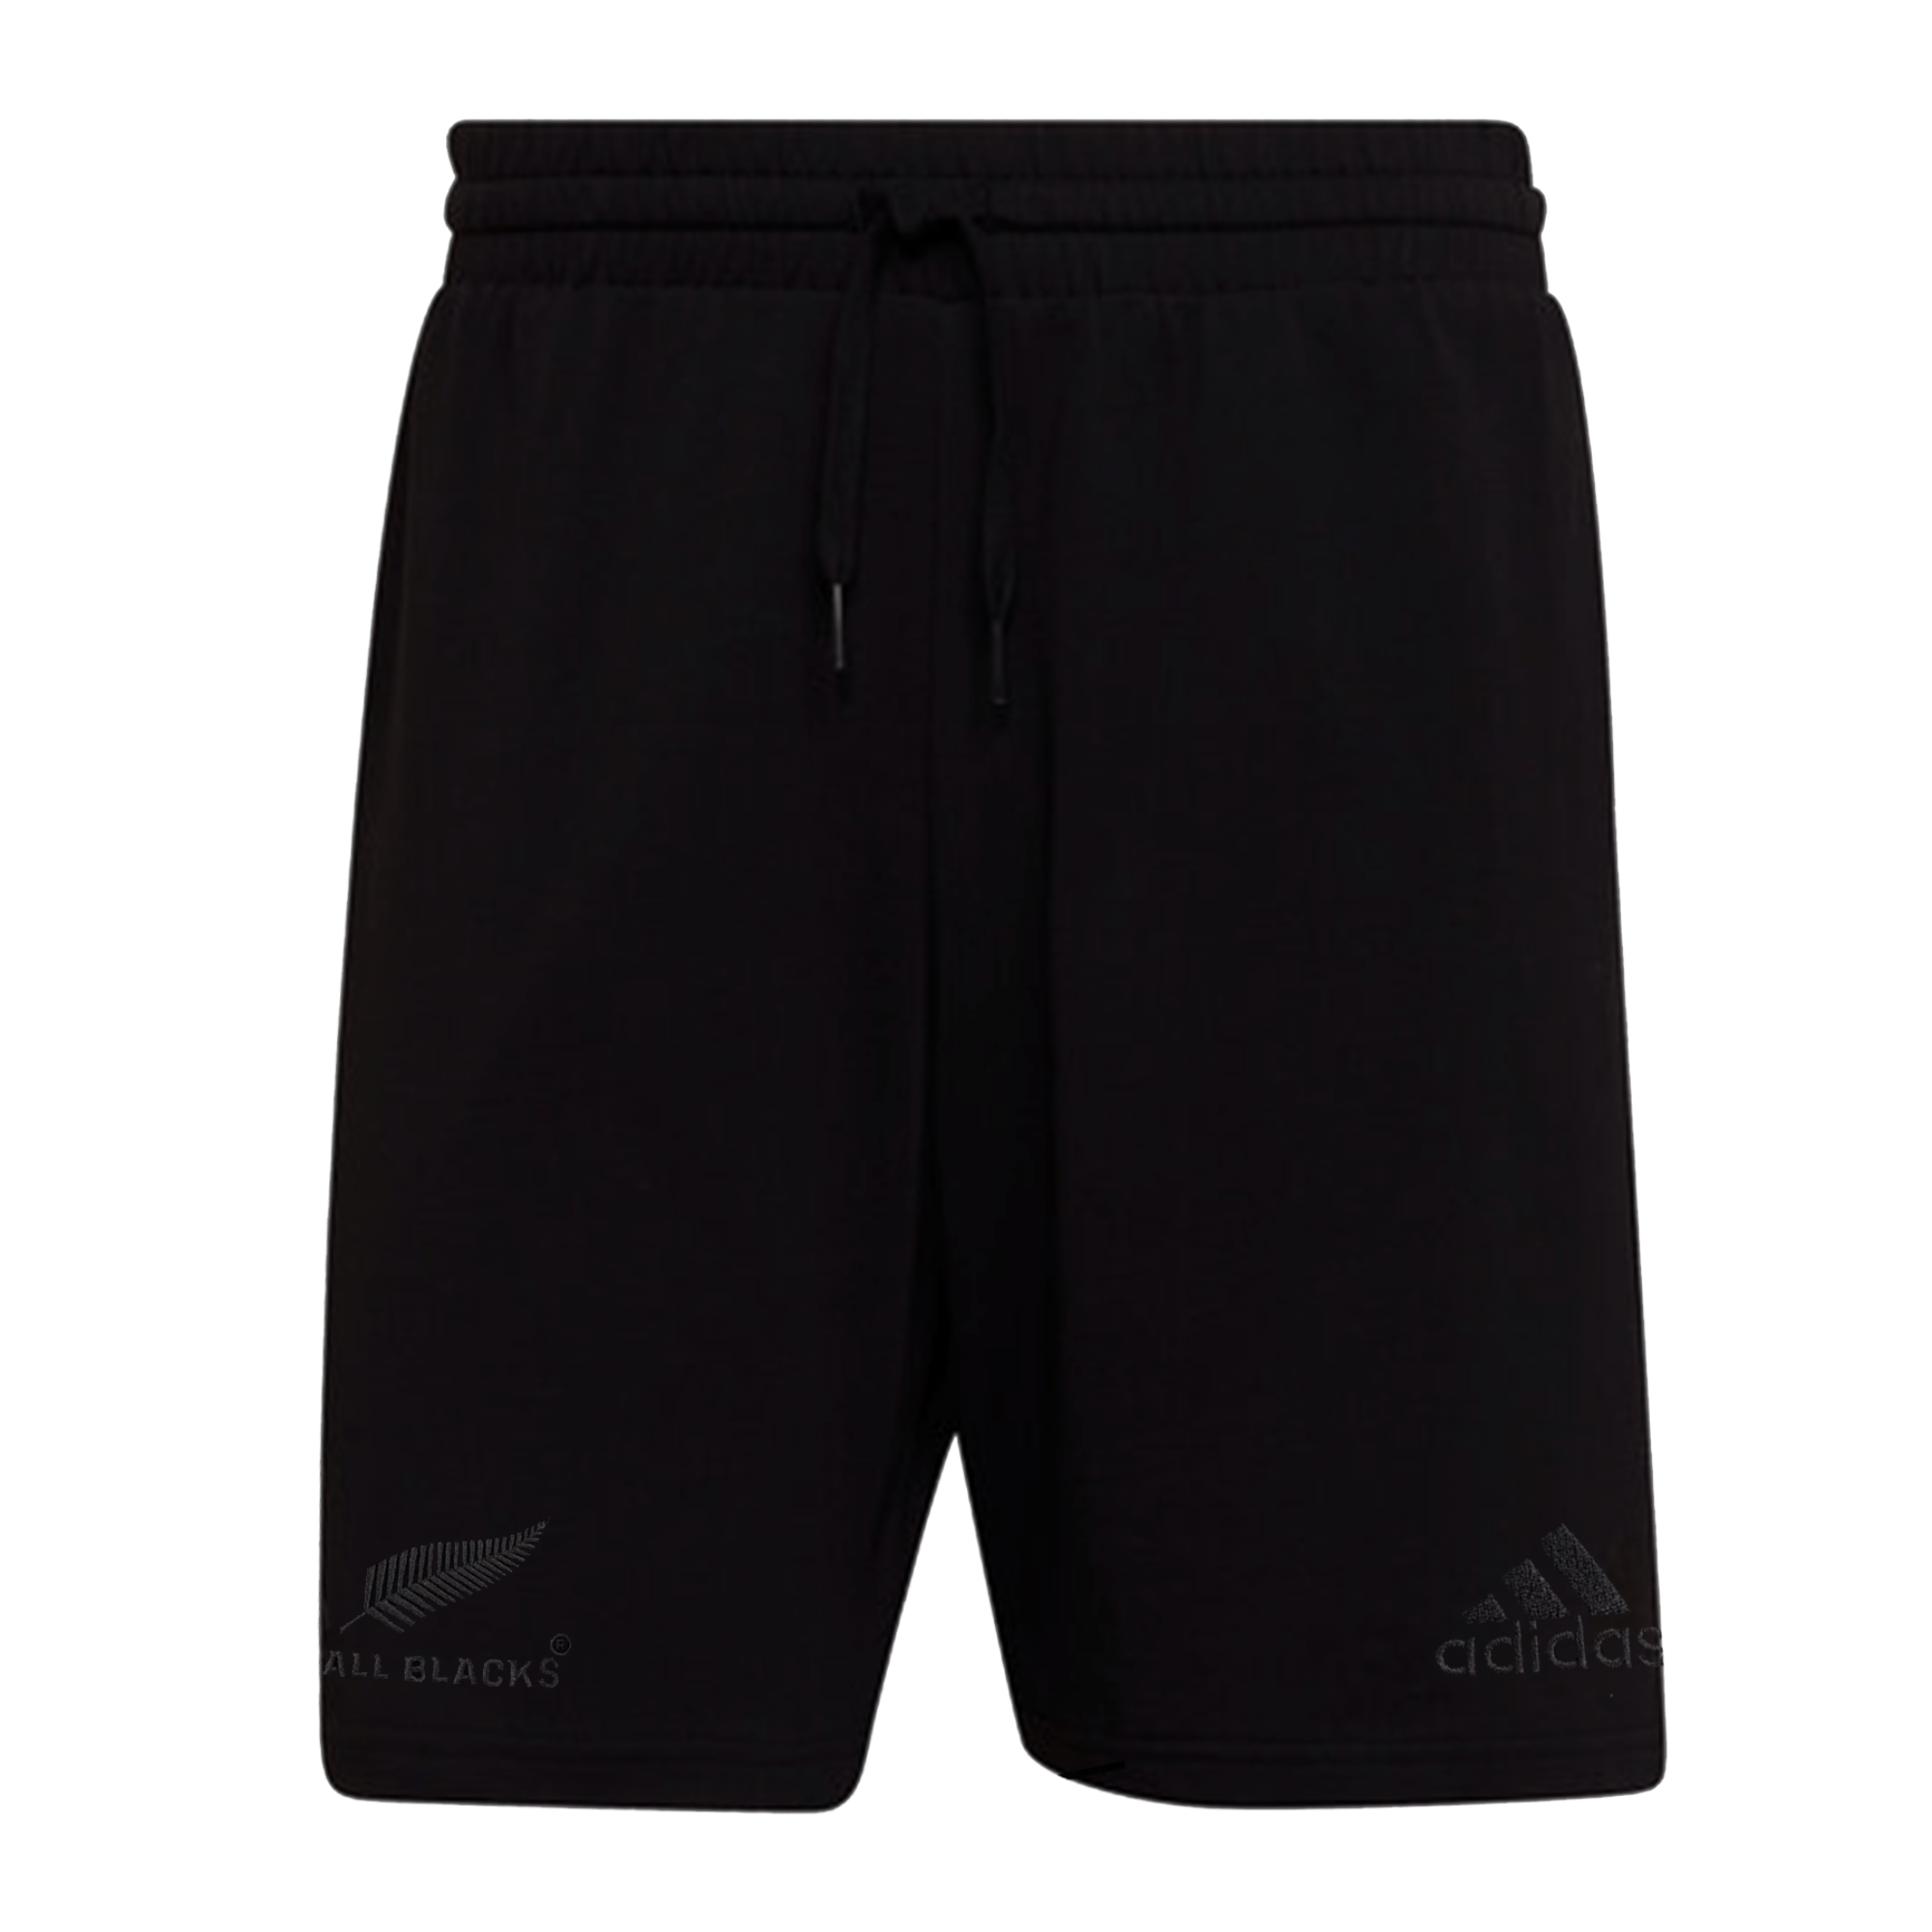 All Blacks Lifestyle Rugby Shorts Embroidered by adidas - World Rugby Shop